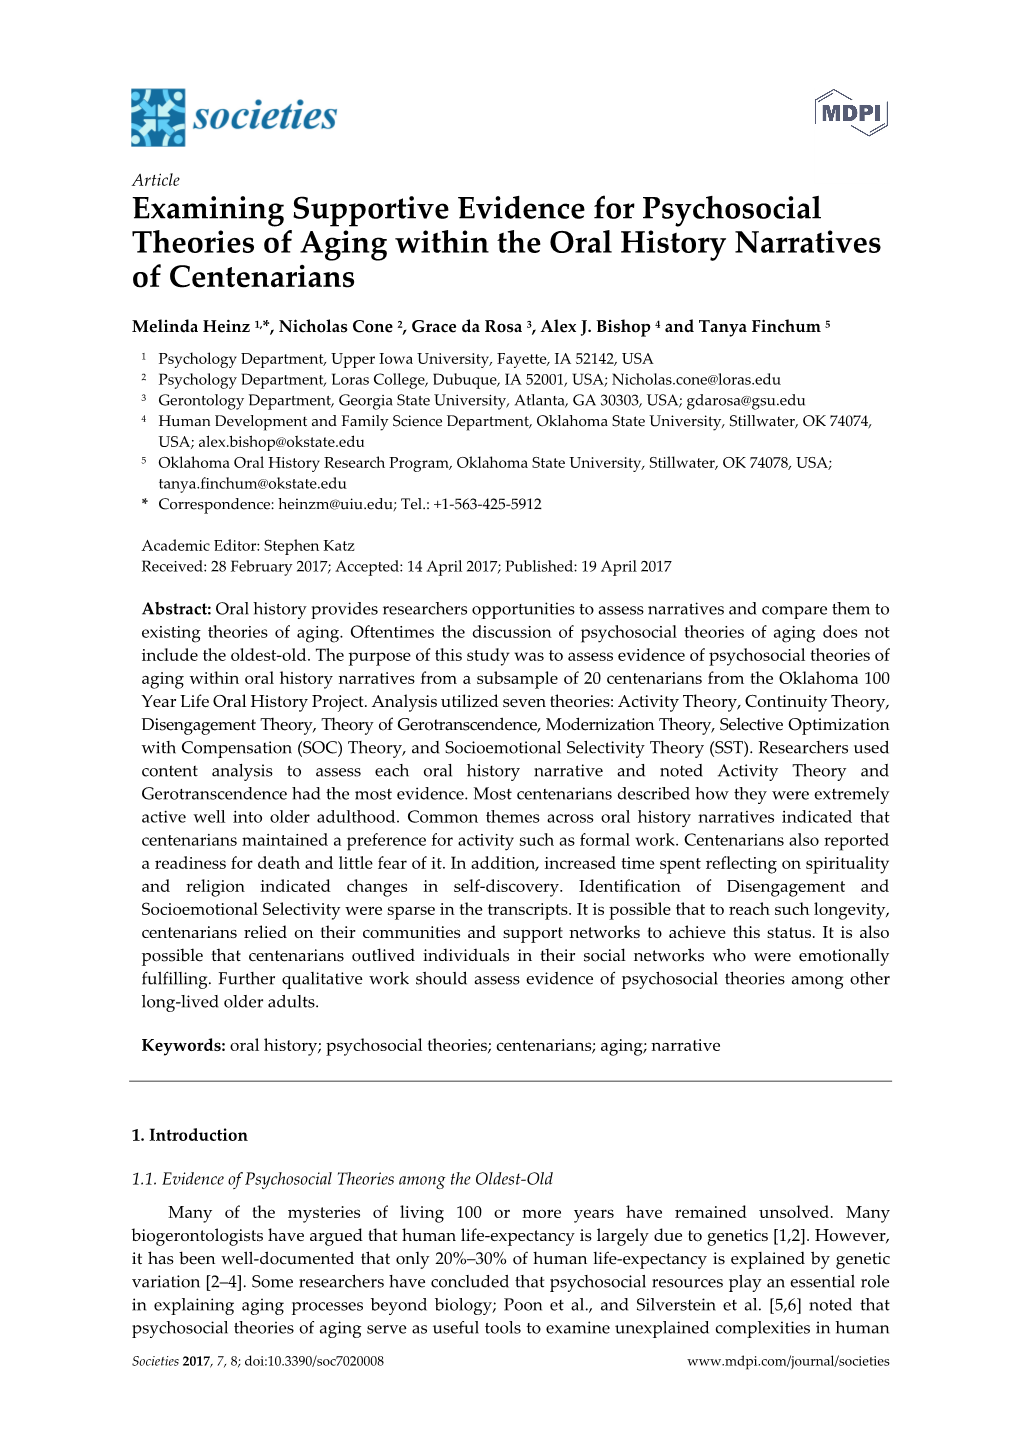 Examining Supportive Evidence for Psychosocial Theories of Aging Within the Oral History Narratives of Centenarians